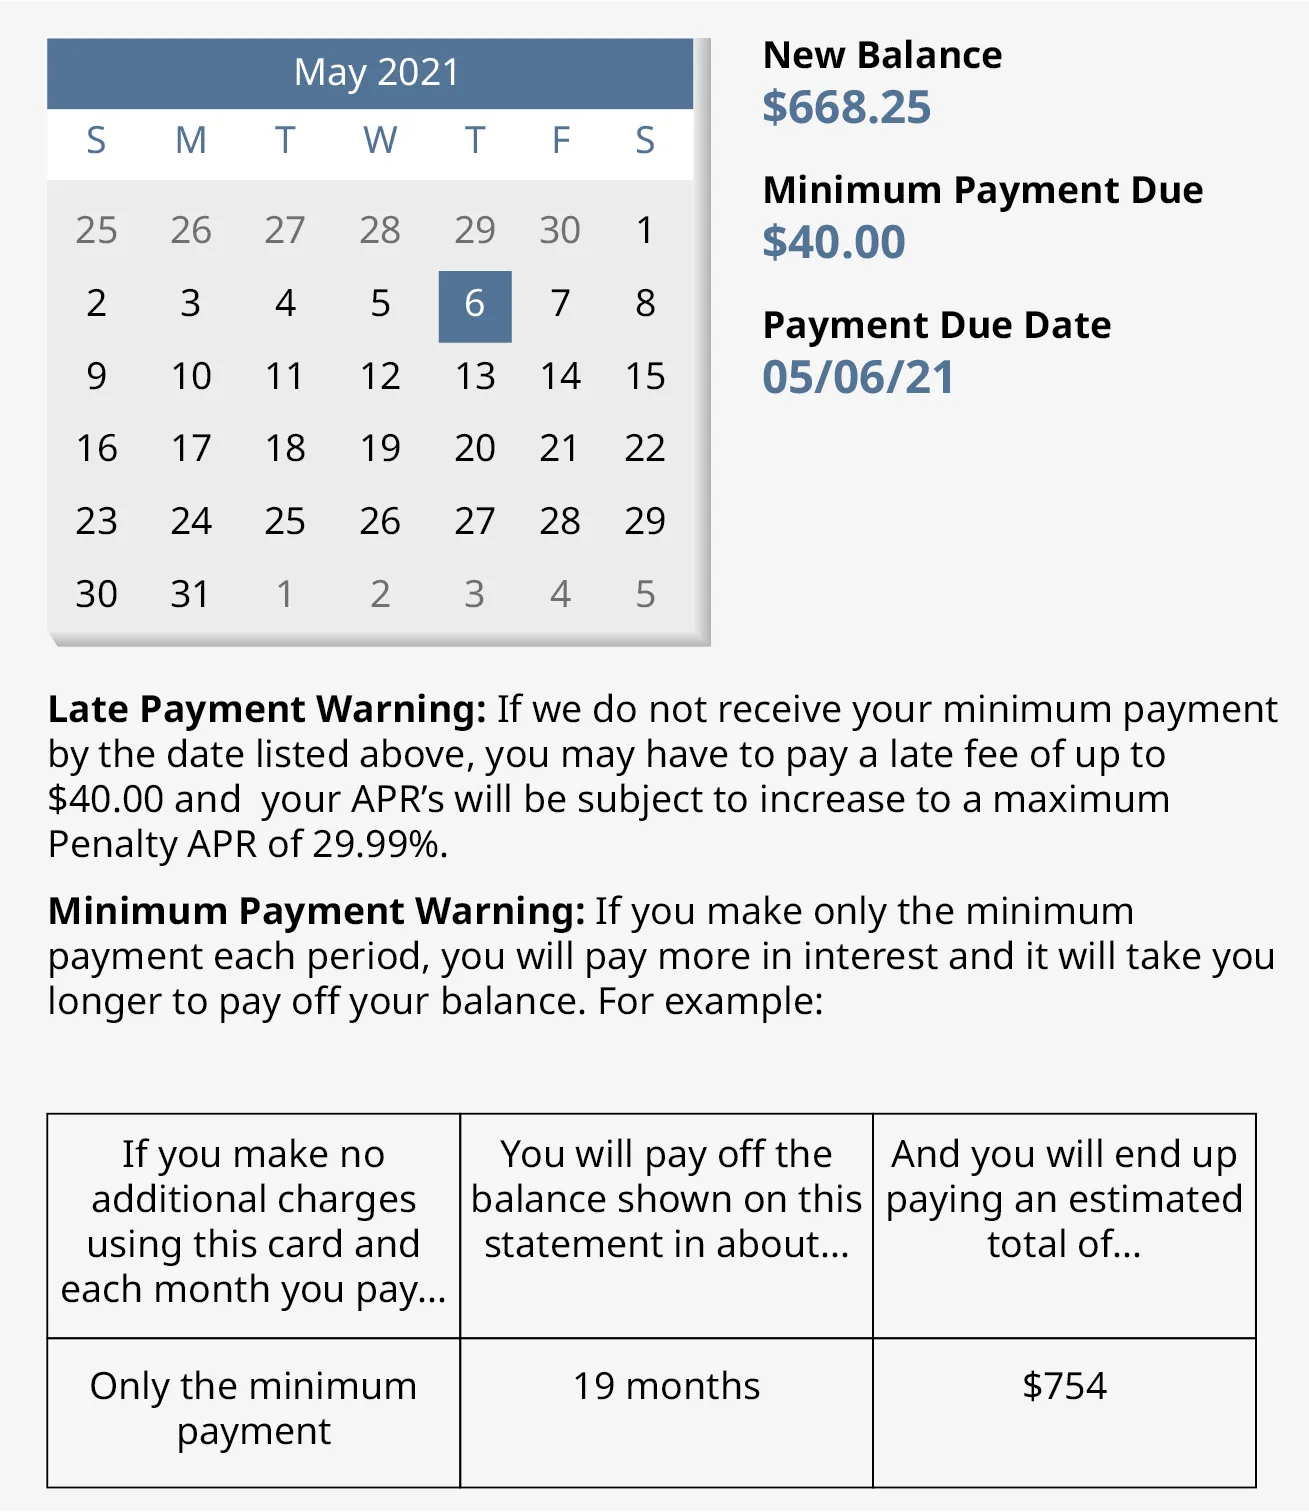 A snapshot of payments. A calendar May 2021 is shown and the date 6 is encircled. The new and minimum balance is $668.25 and $40.00. The payment due date is 05/06/21.